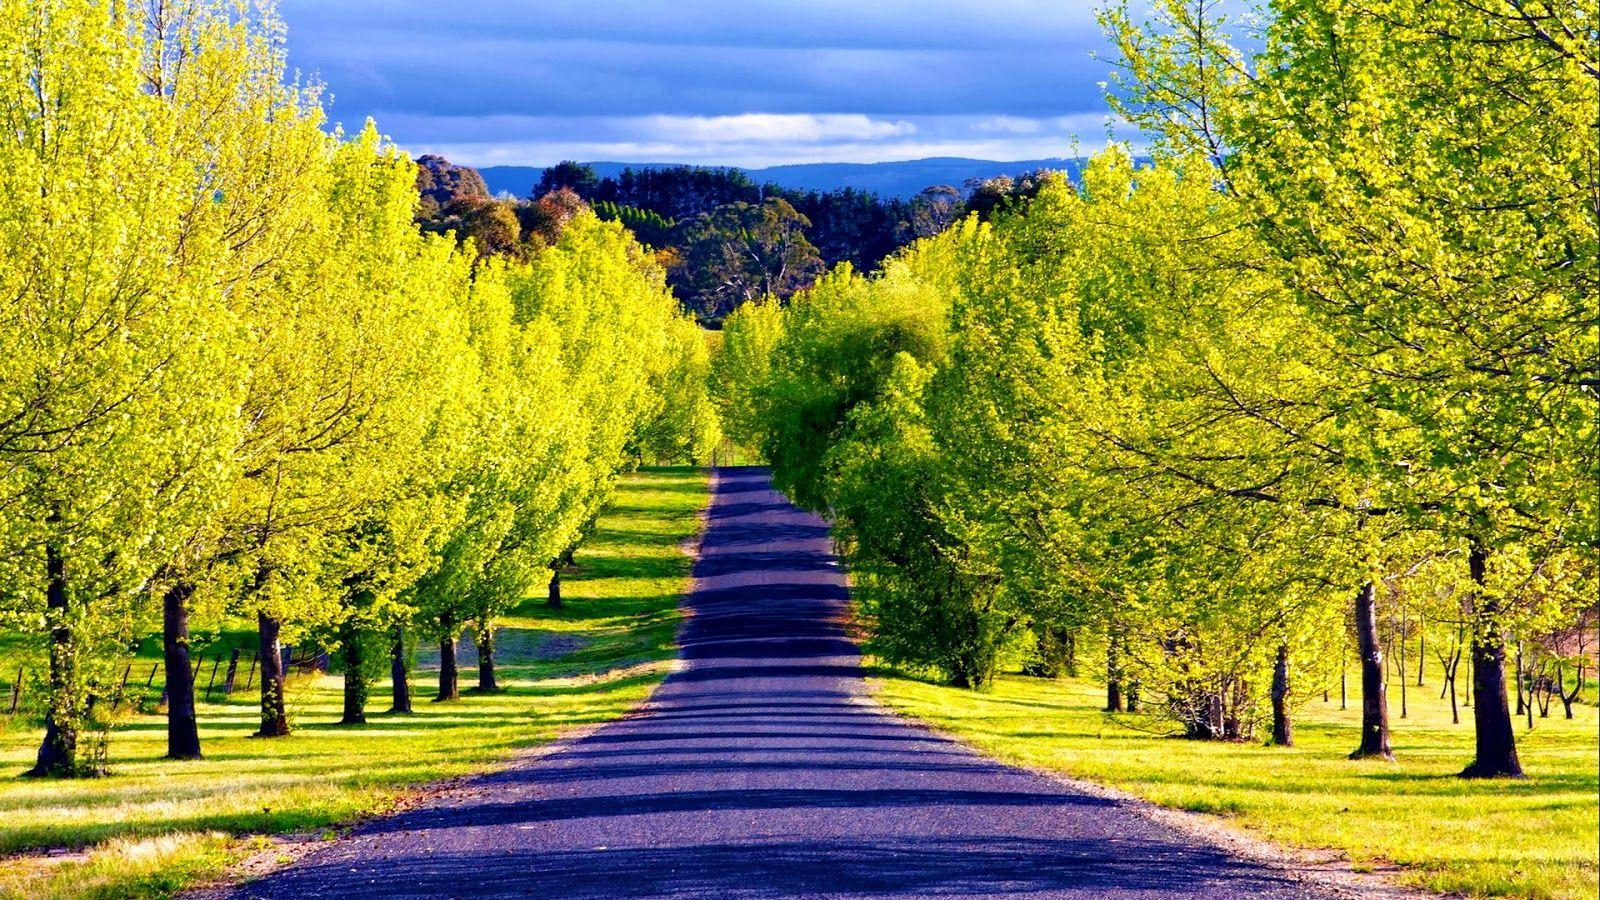 Pathway Wallpaper. Most beautiful places in the world. Download Free Wallpaper. Scenic wallpaper, Most beautiful wallpaper, Beautiful places in the world